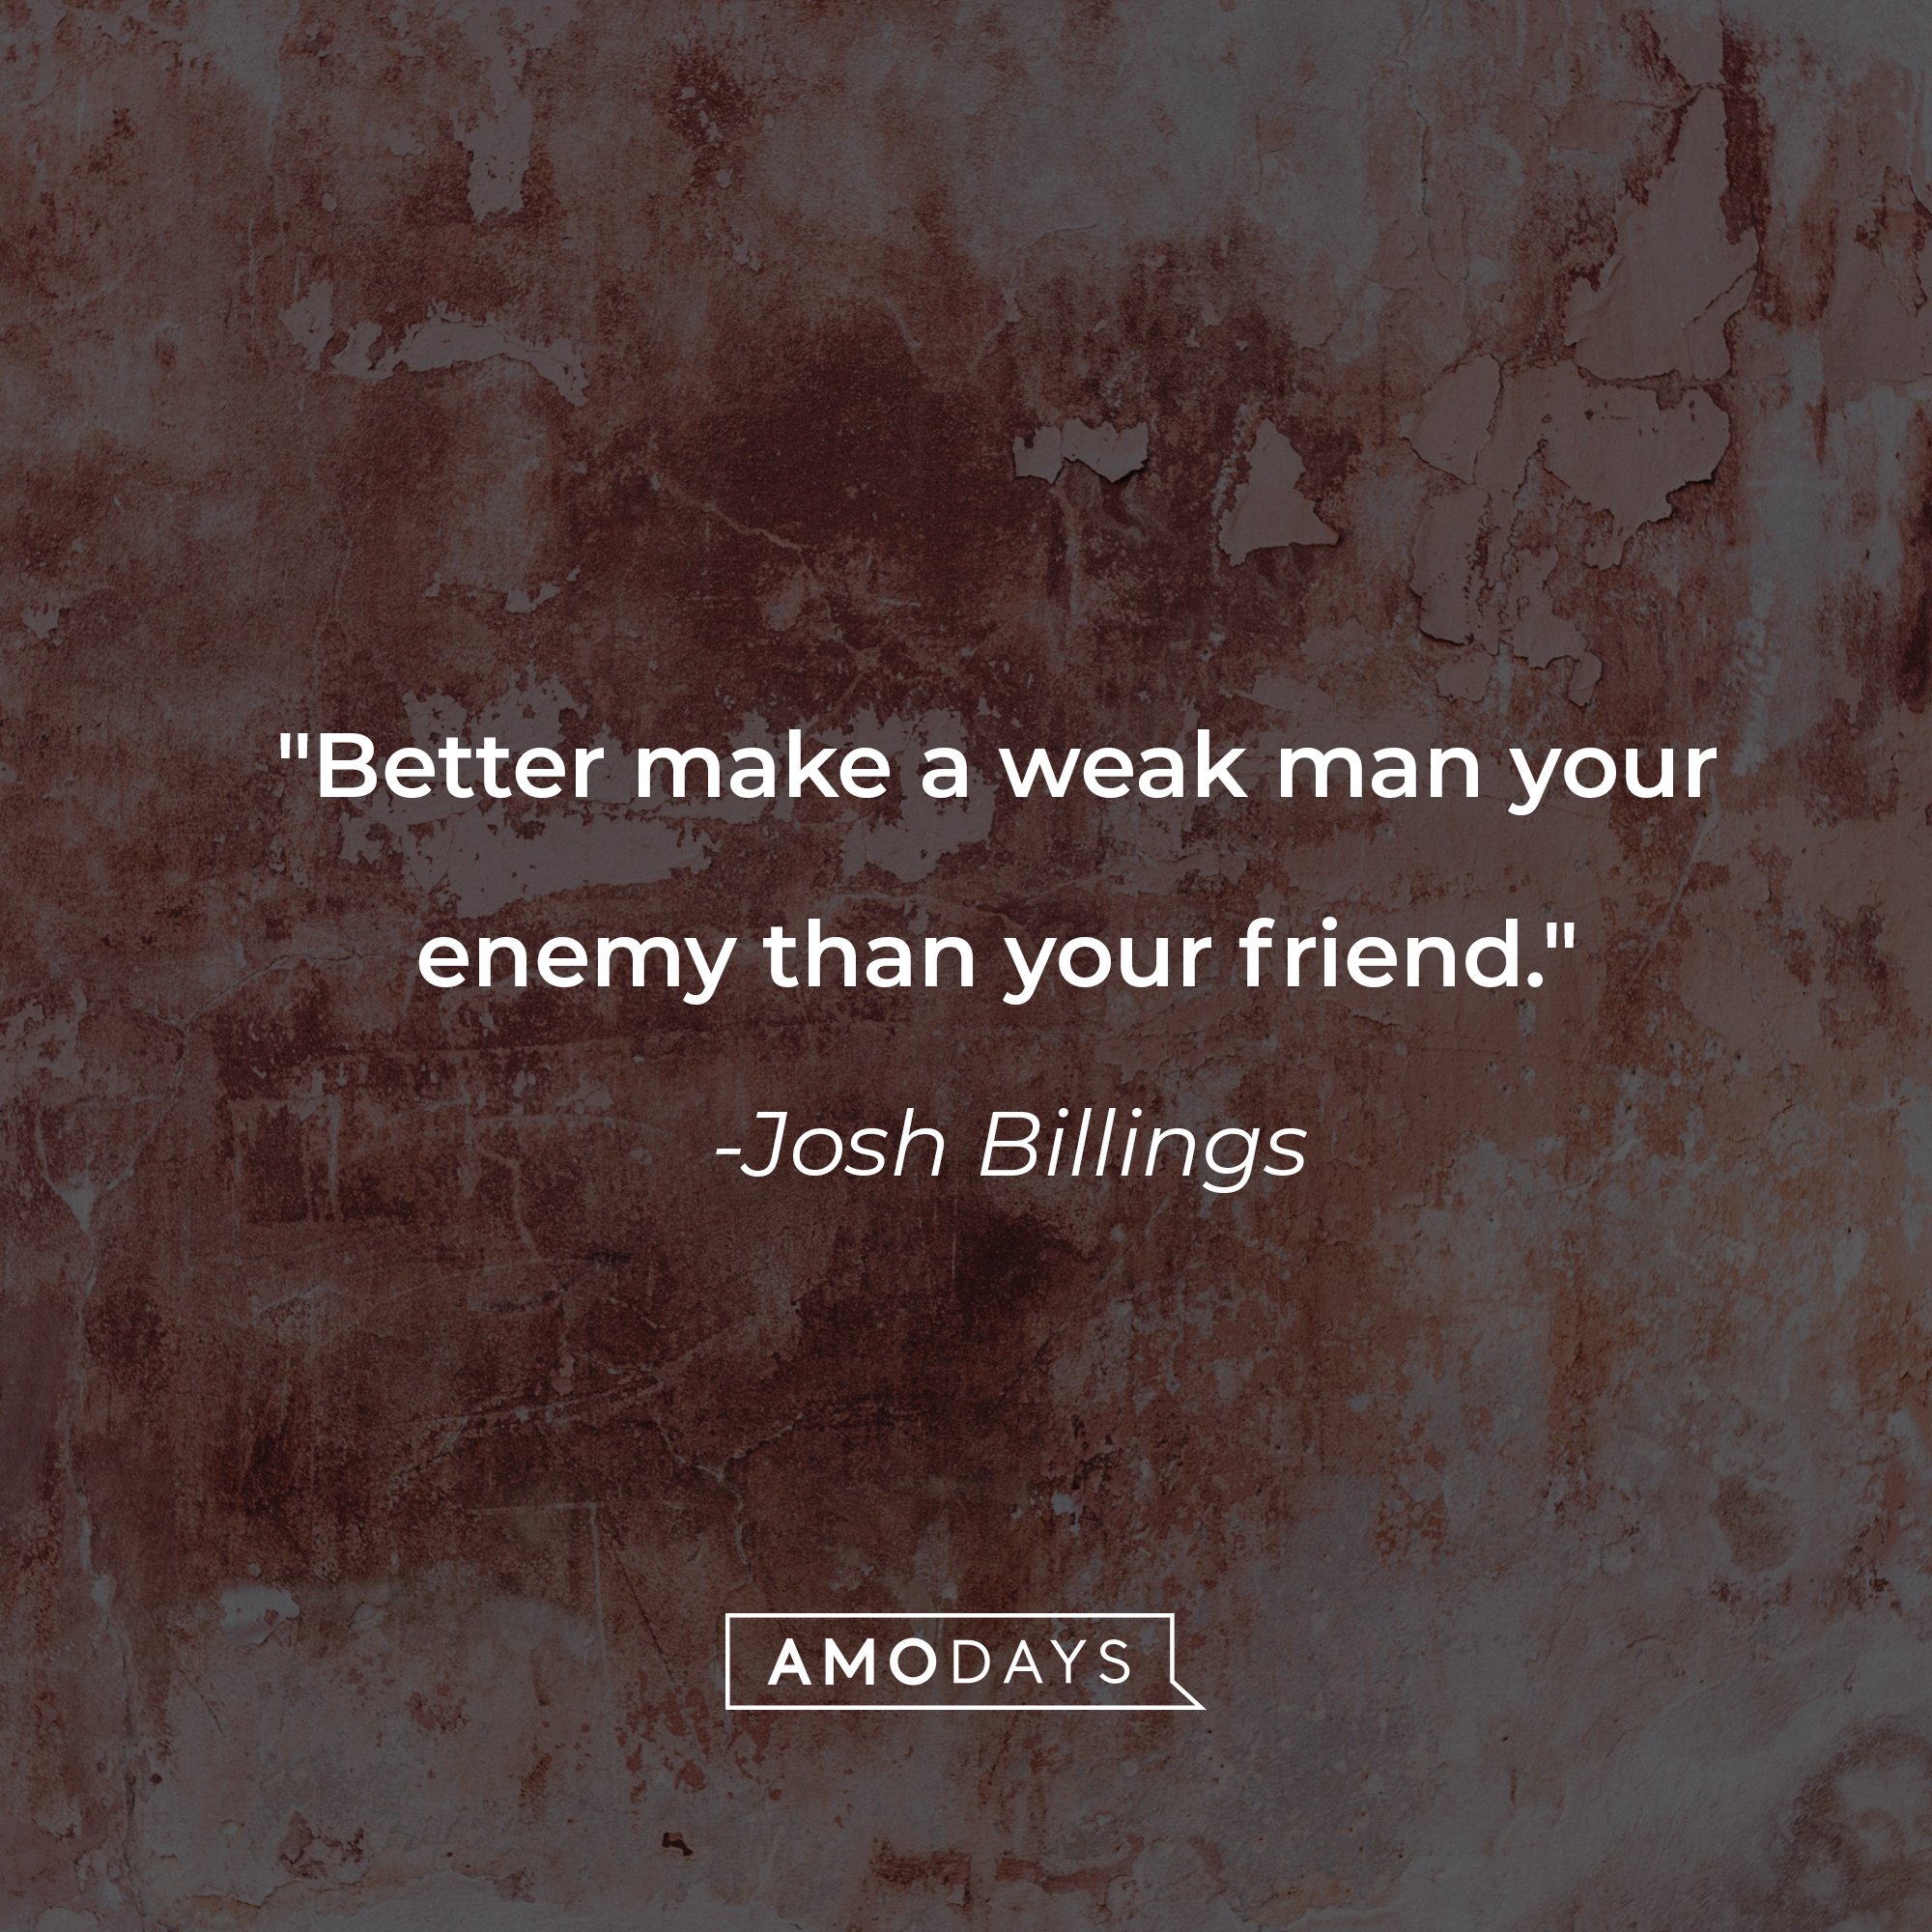 Josh Billings' quote: "Better make a weak man your enemy than your friend." | Image: AmoDays